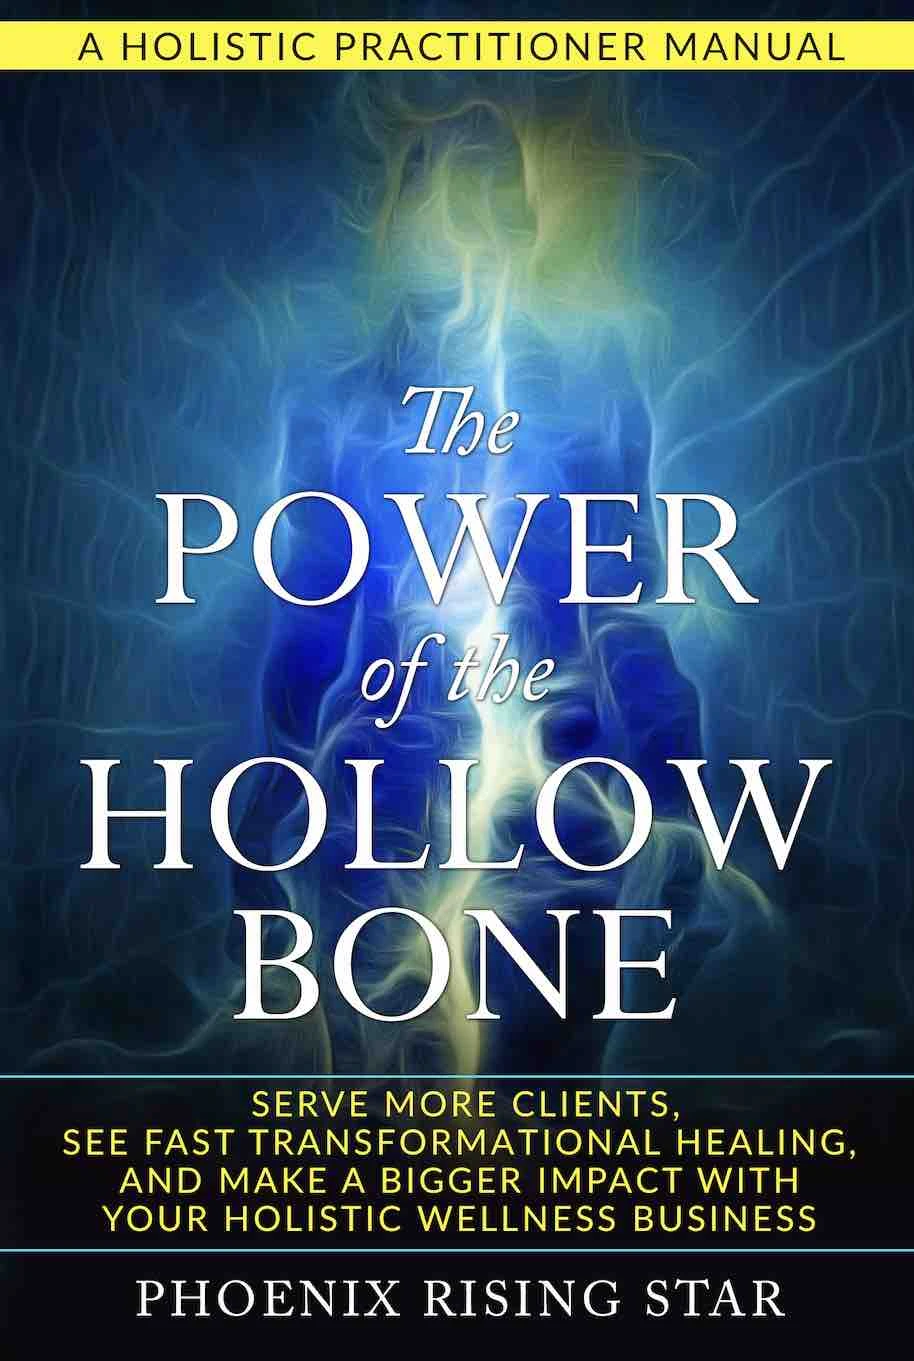 The Power of the Hollow Bone